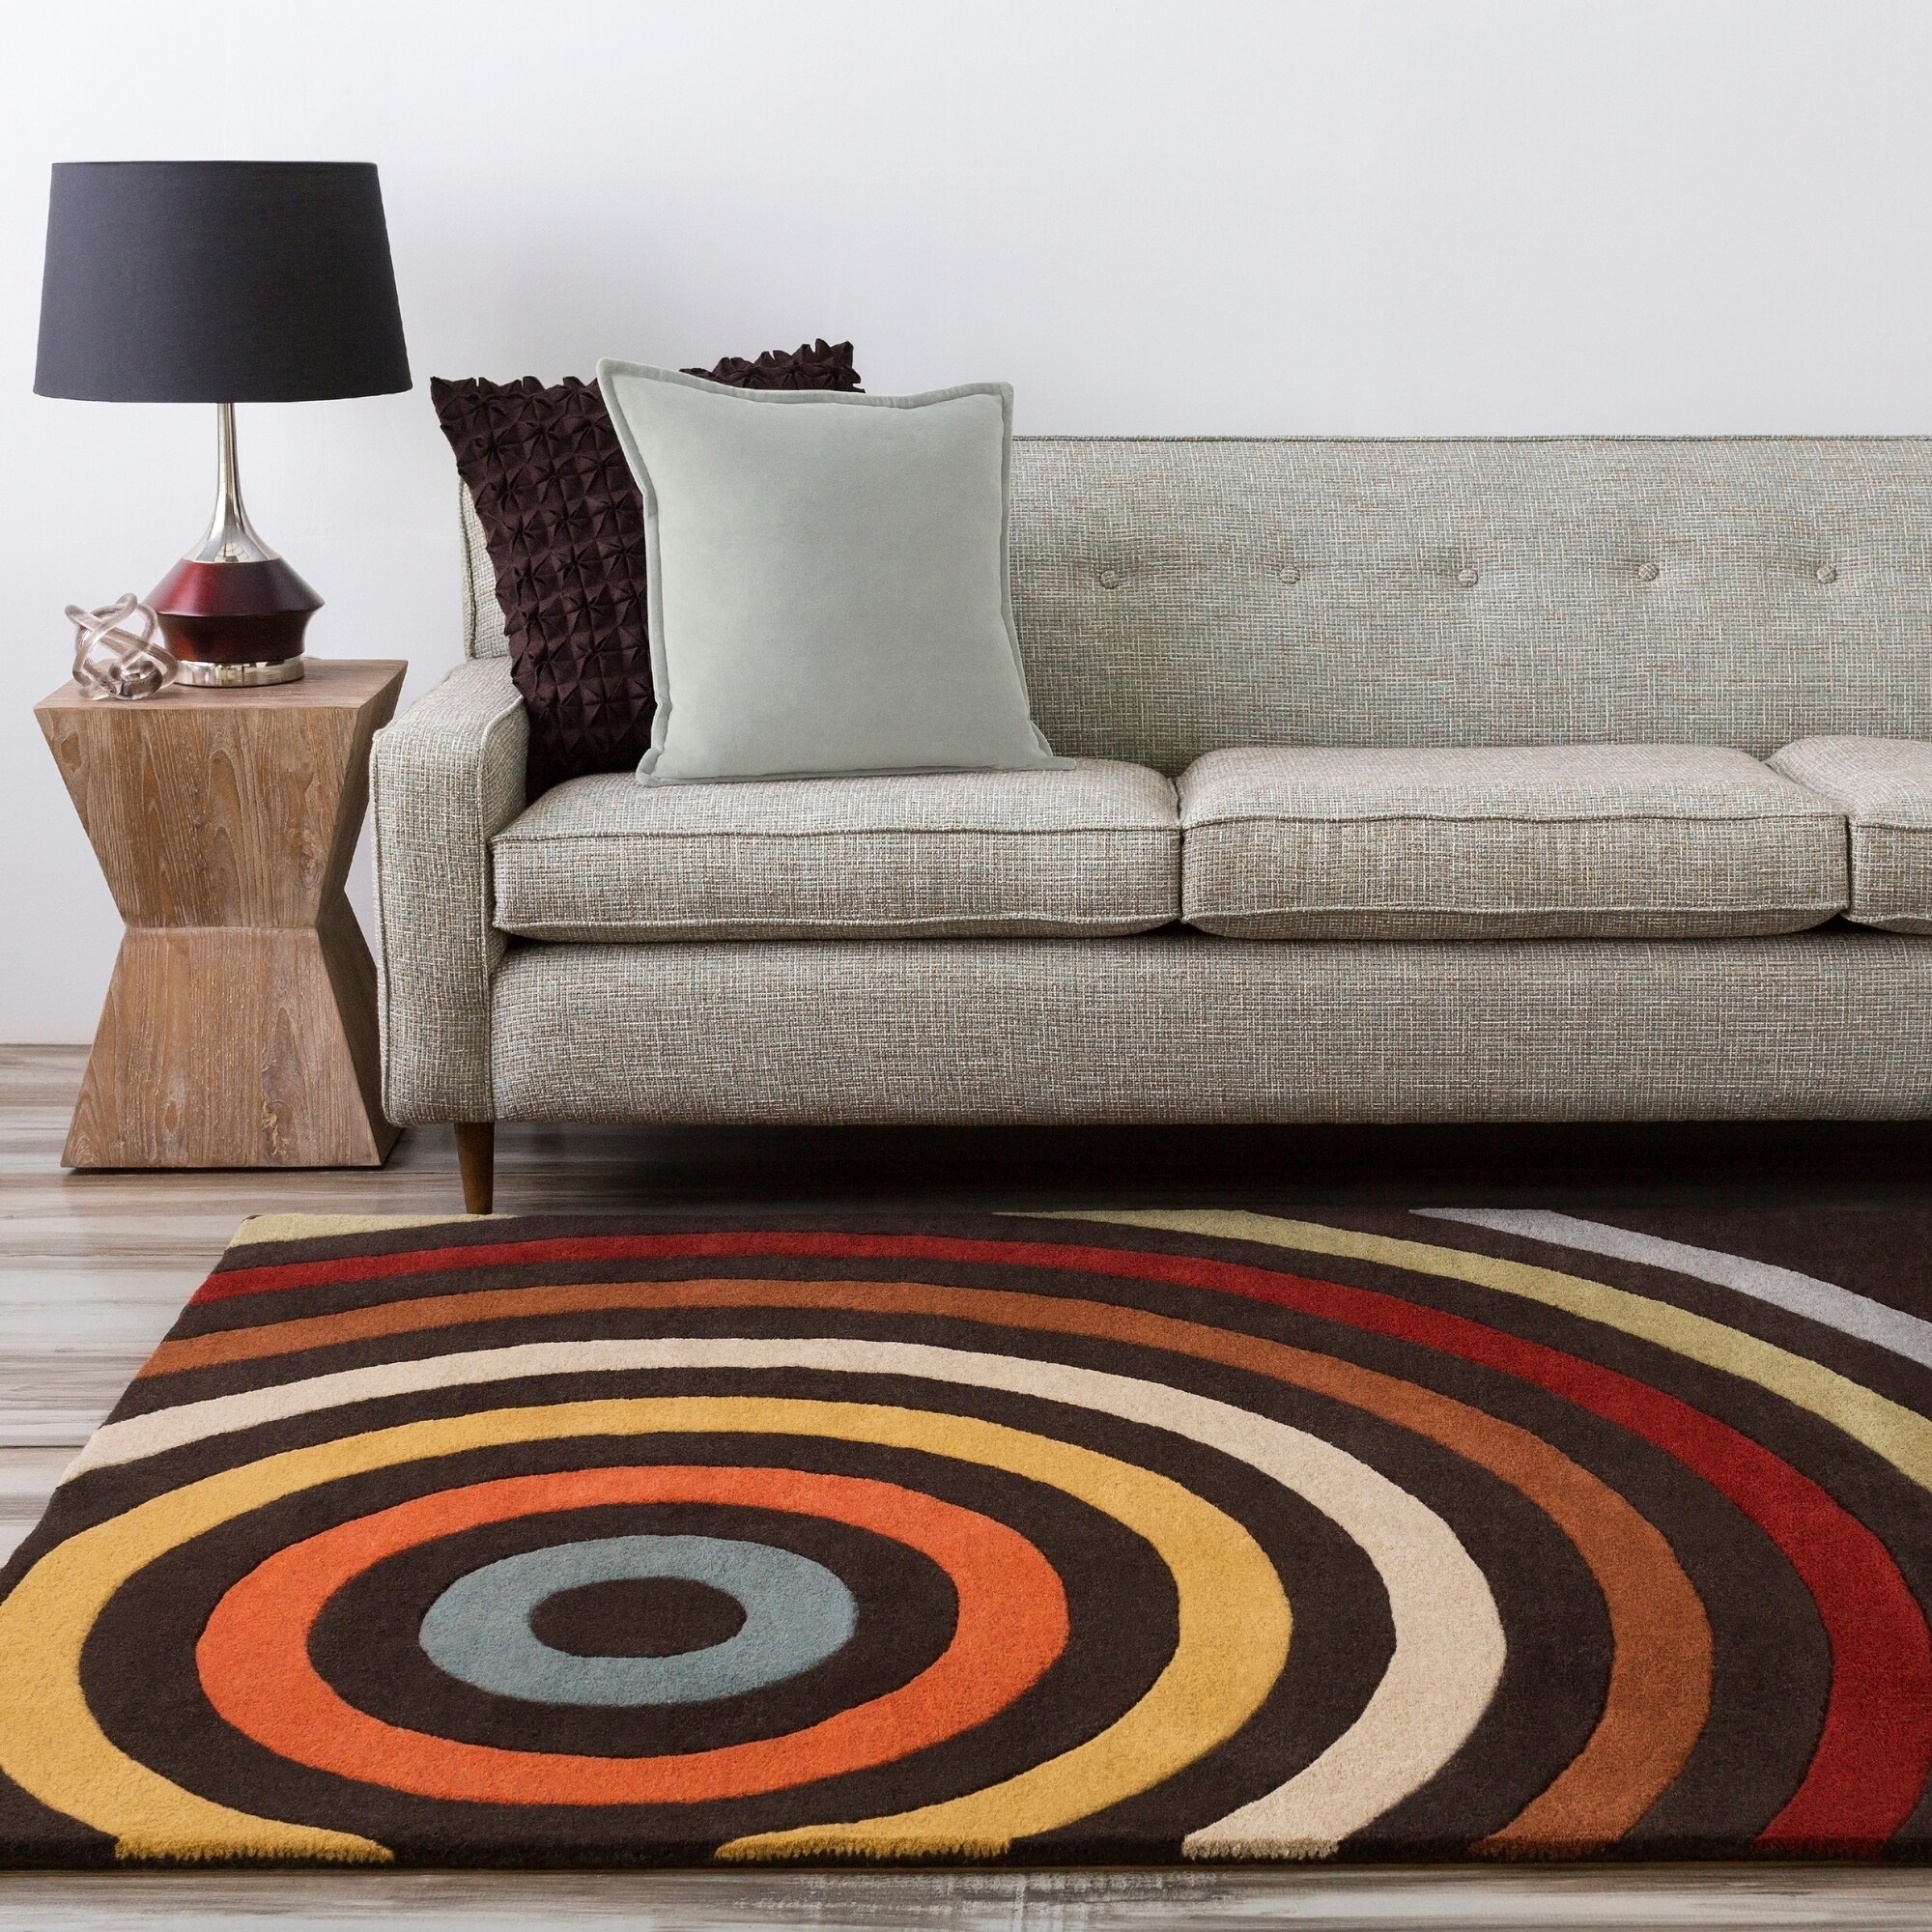 Hand tufted Black Contemporary Multi Colored Circles Mayflower Wool Geometric Rug (8 X 11)